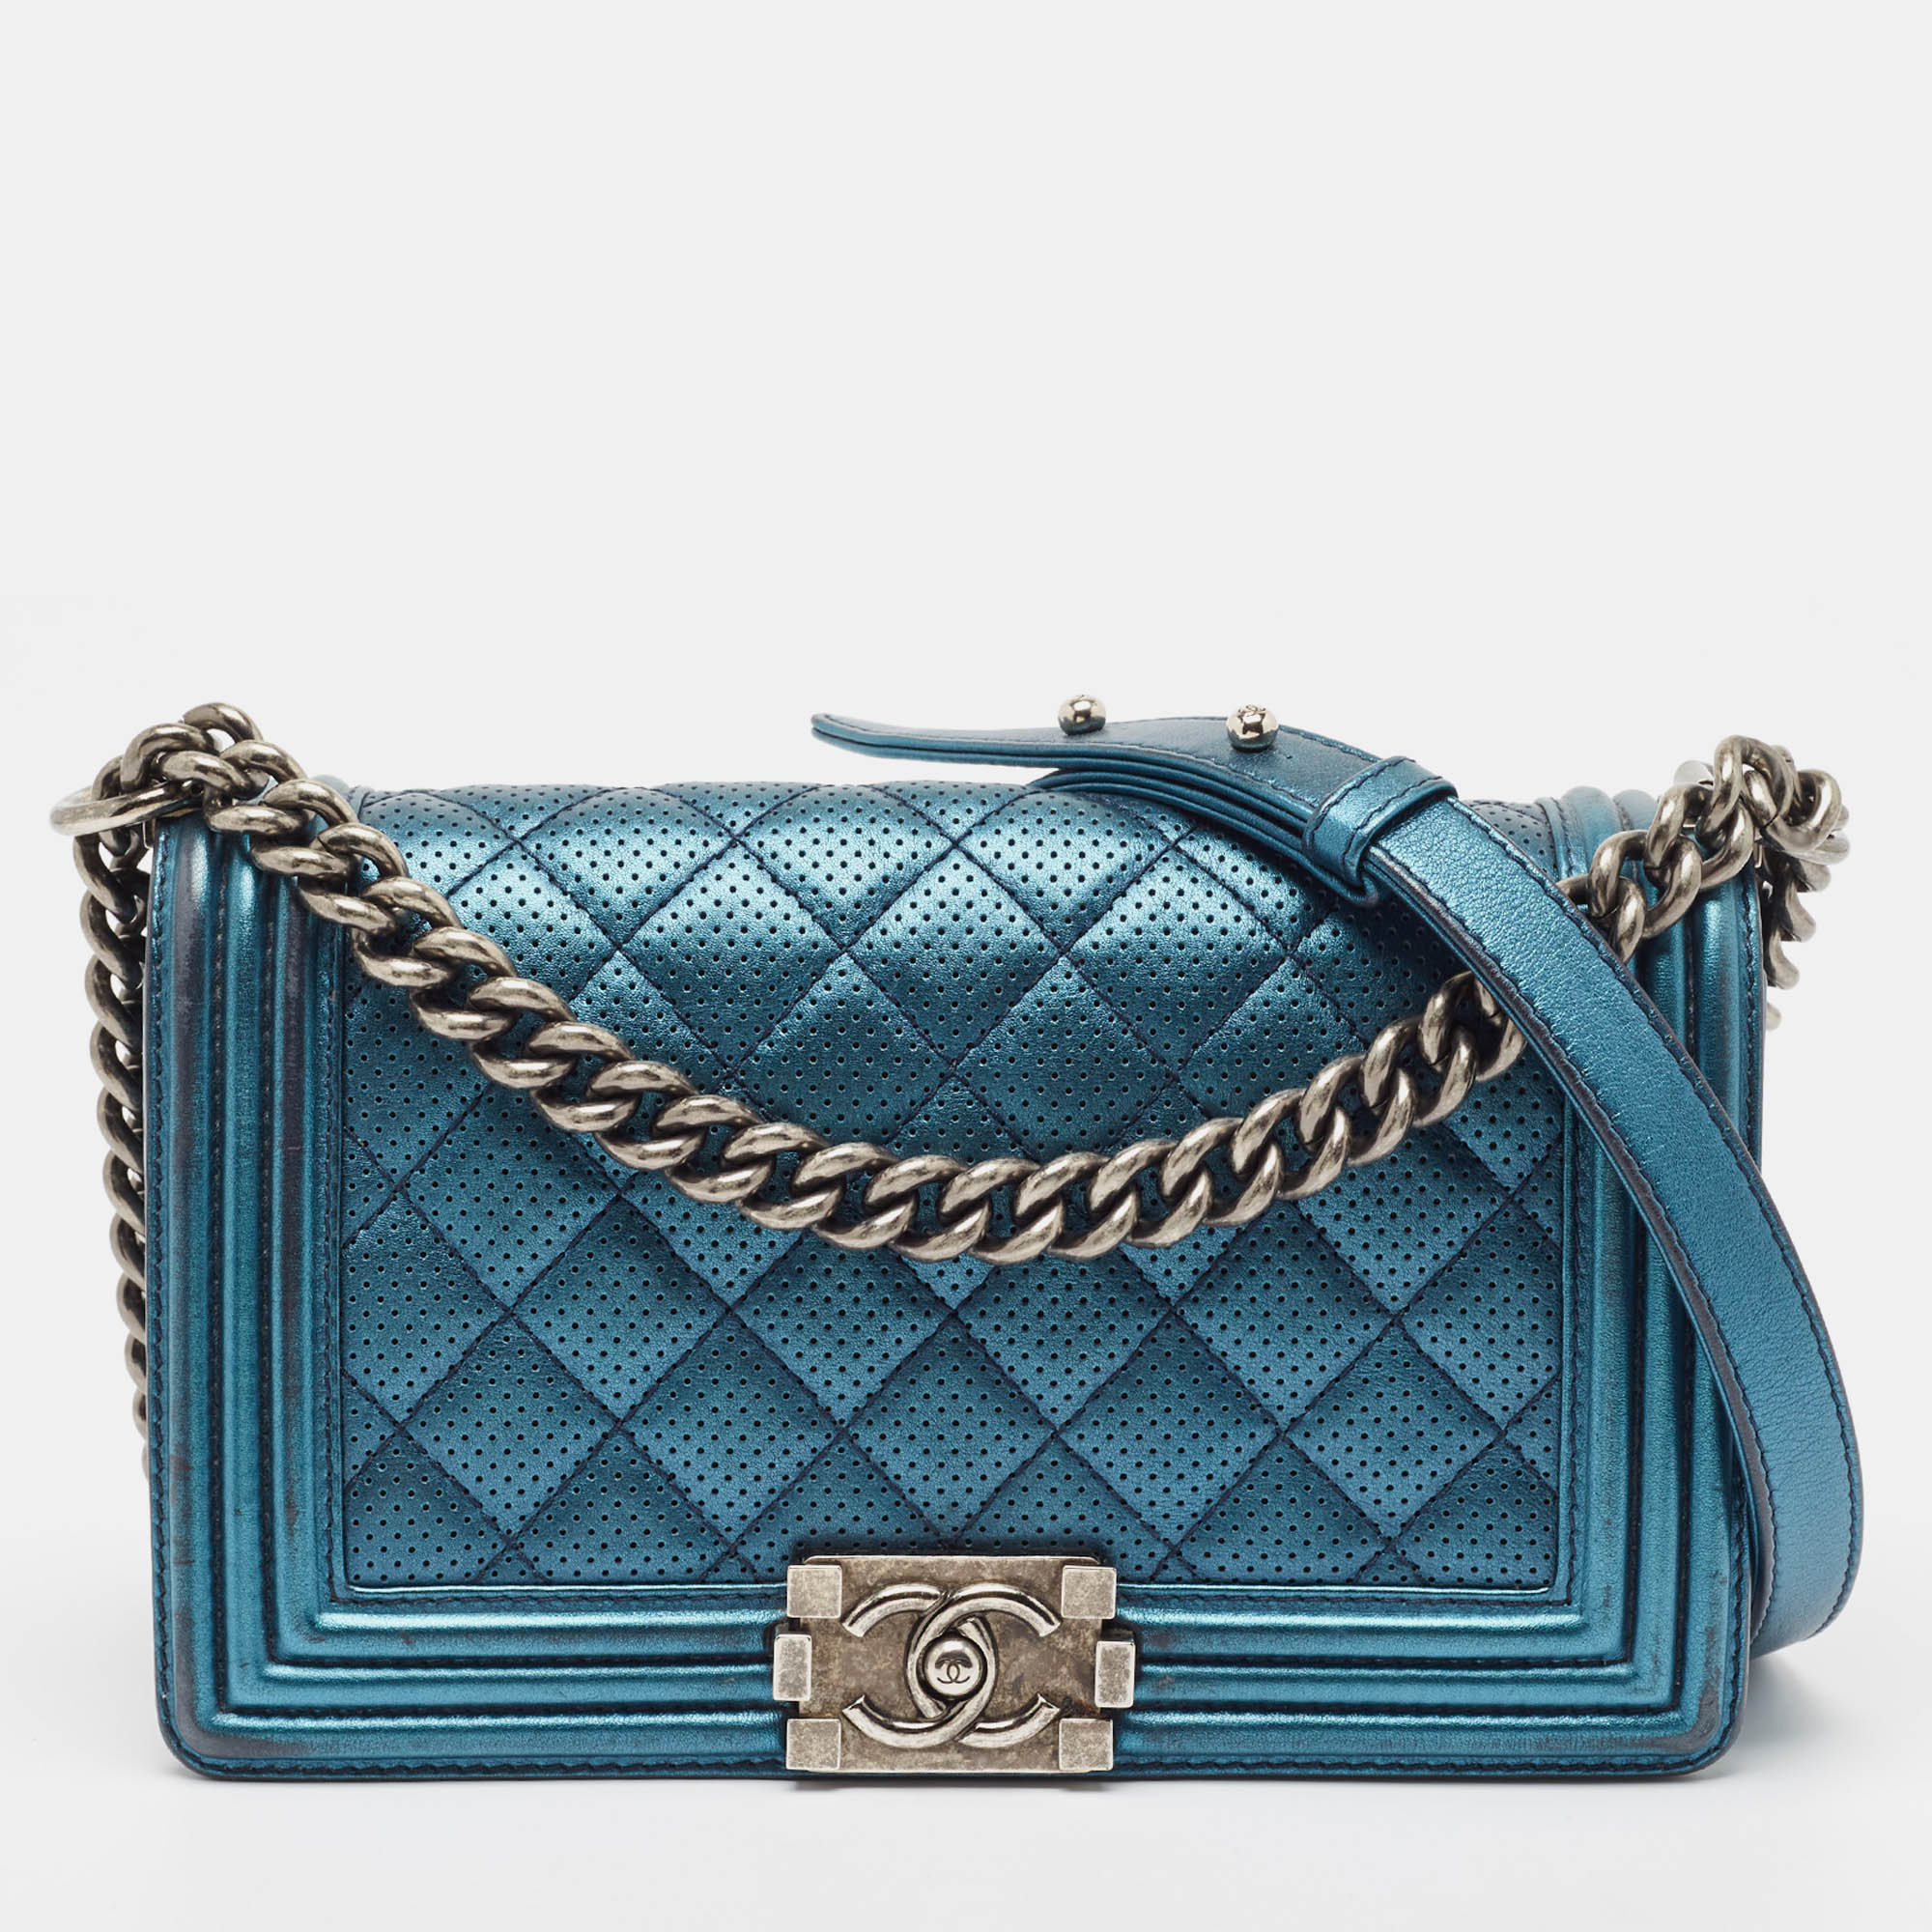 

Chanel Metallic Blue Perforated Quilted Leather Medium Boy Flap Bag